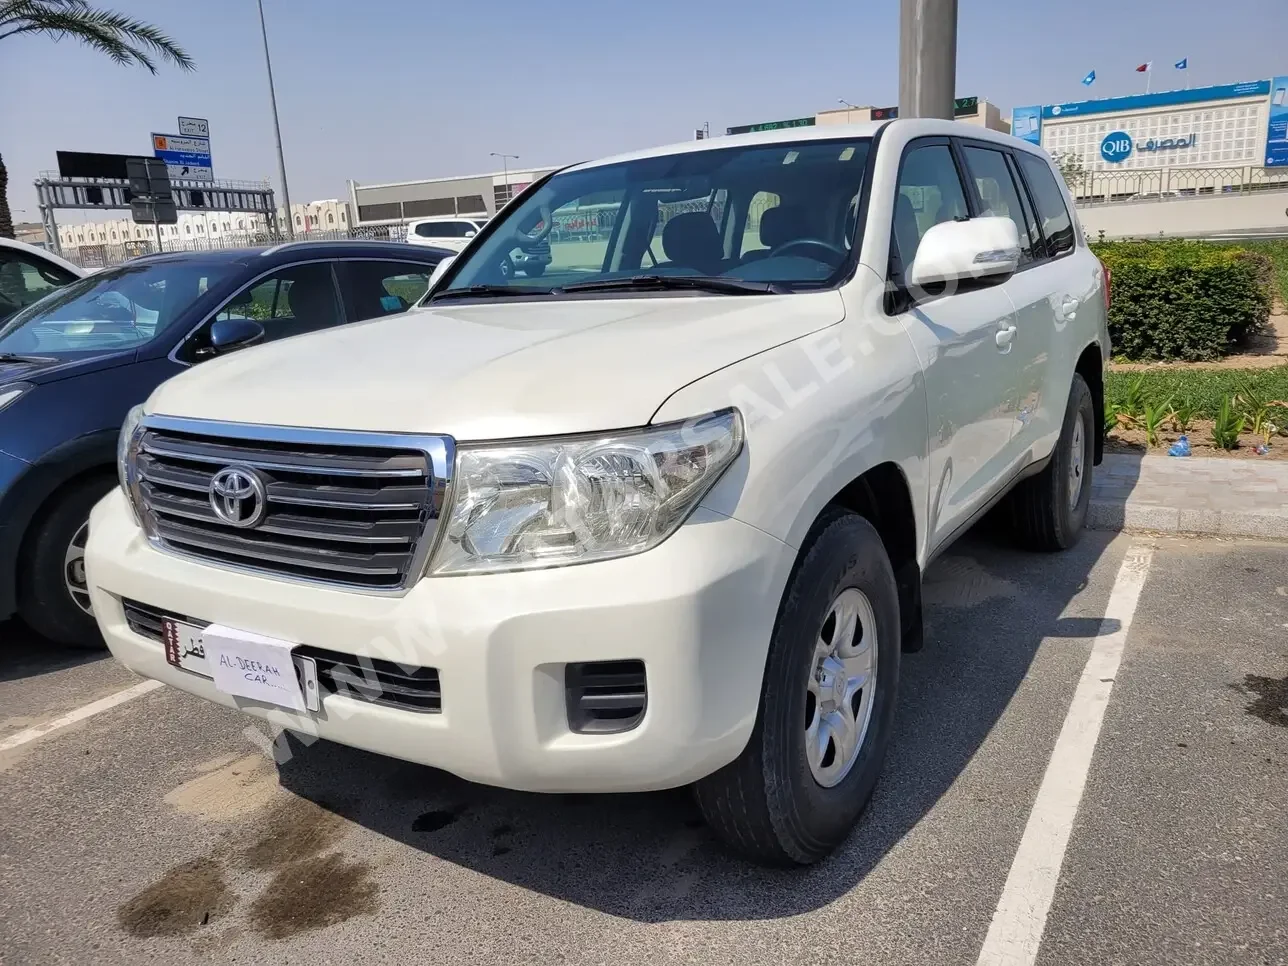 Toyota  Land Cruiser  G  2012  Automatic  31,000 Km  6 Cylinder  Four Wheel Drive (4WD)  SUV  White